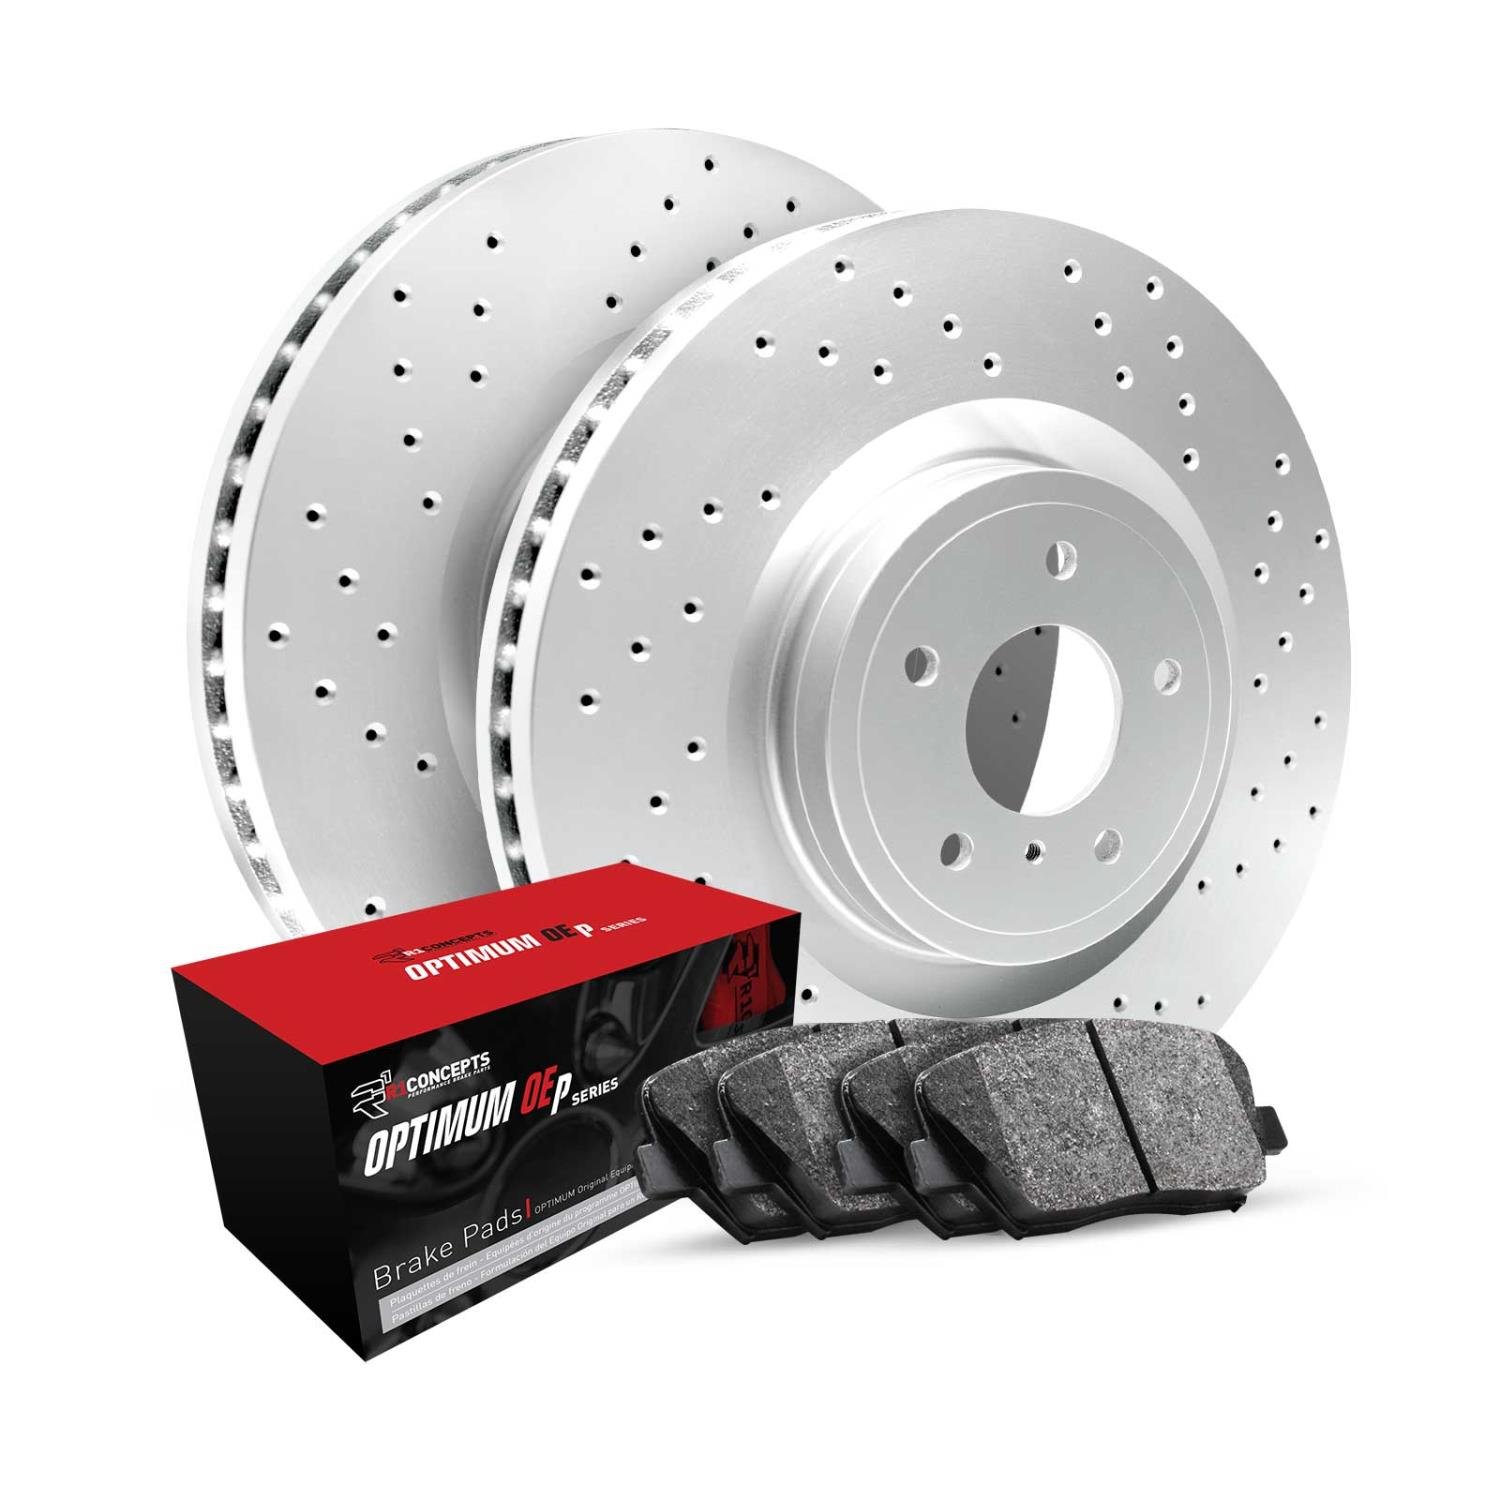 GEO-Carbon Drilled Brake Rotor Set w/Optimum OE Pads, 2015-2019 Fits Multiple Makes/Models, Position: Rear